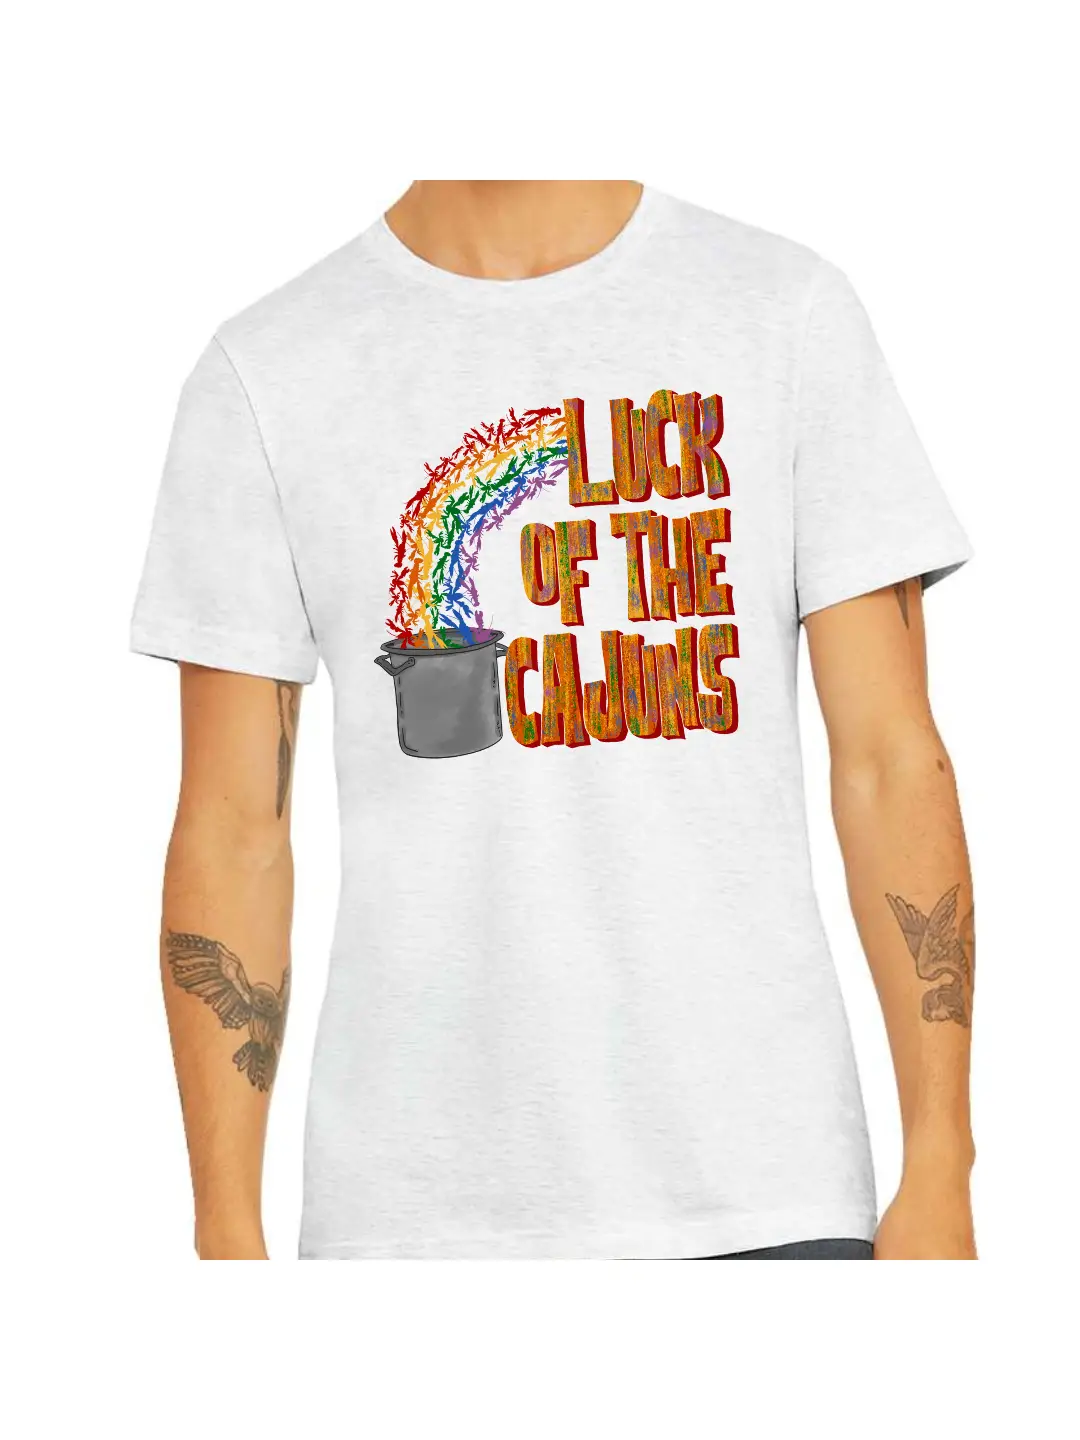 Luck of the Cajuns Louisiana Crawfish Boil Graphic Tee